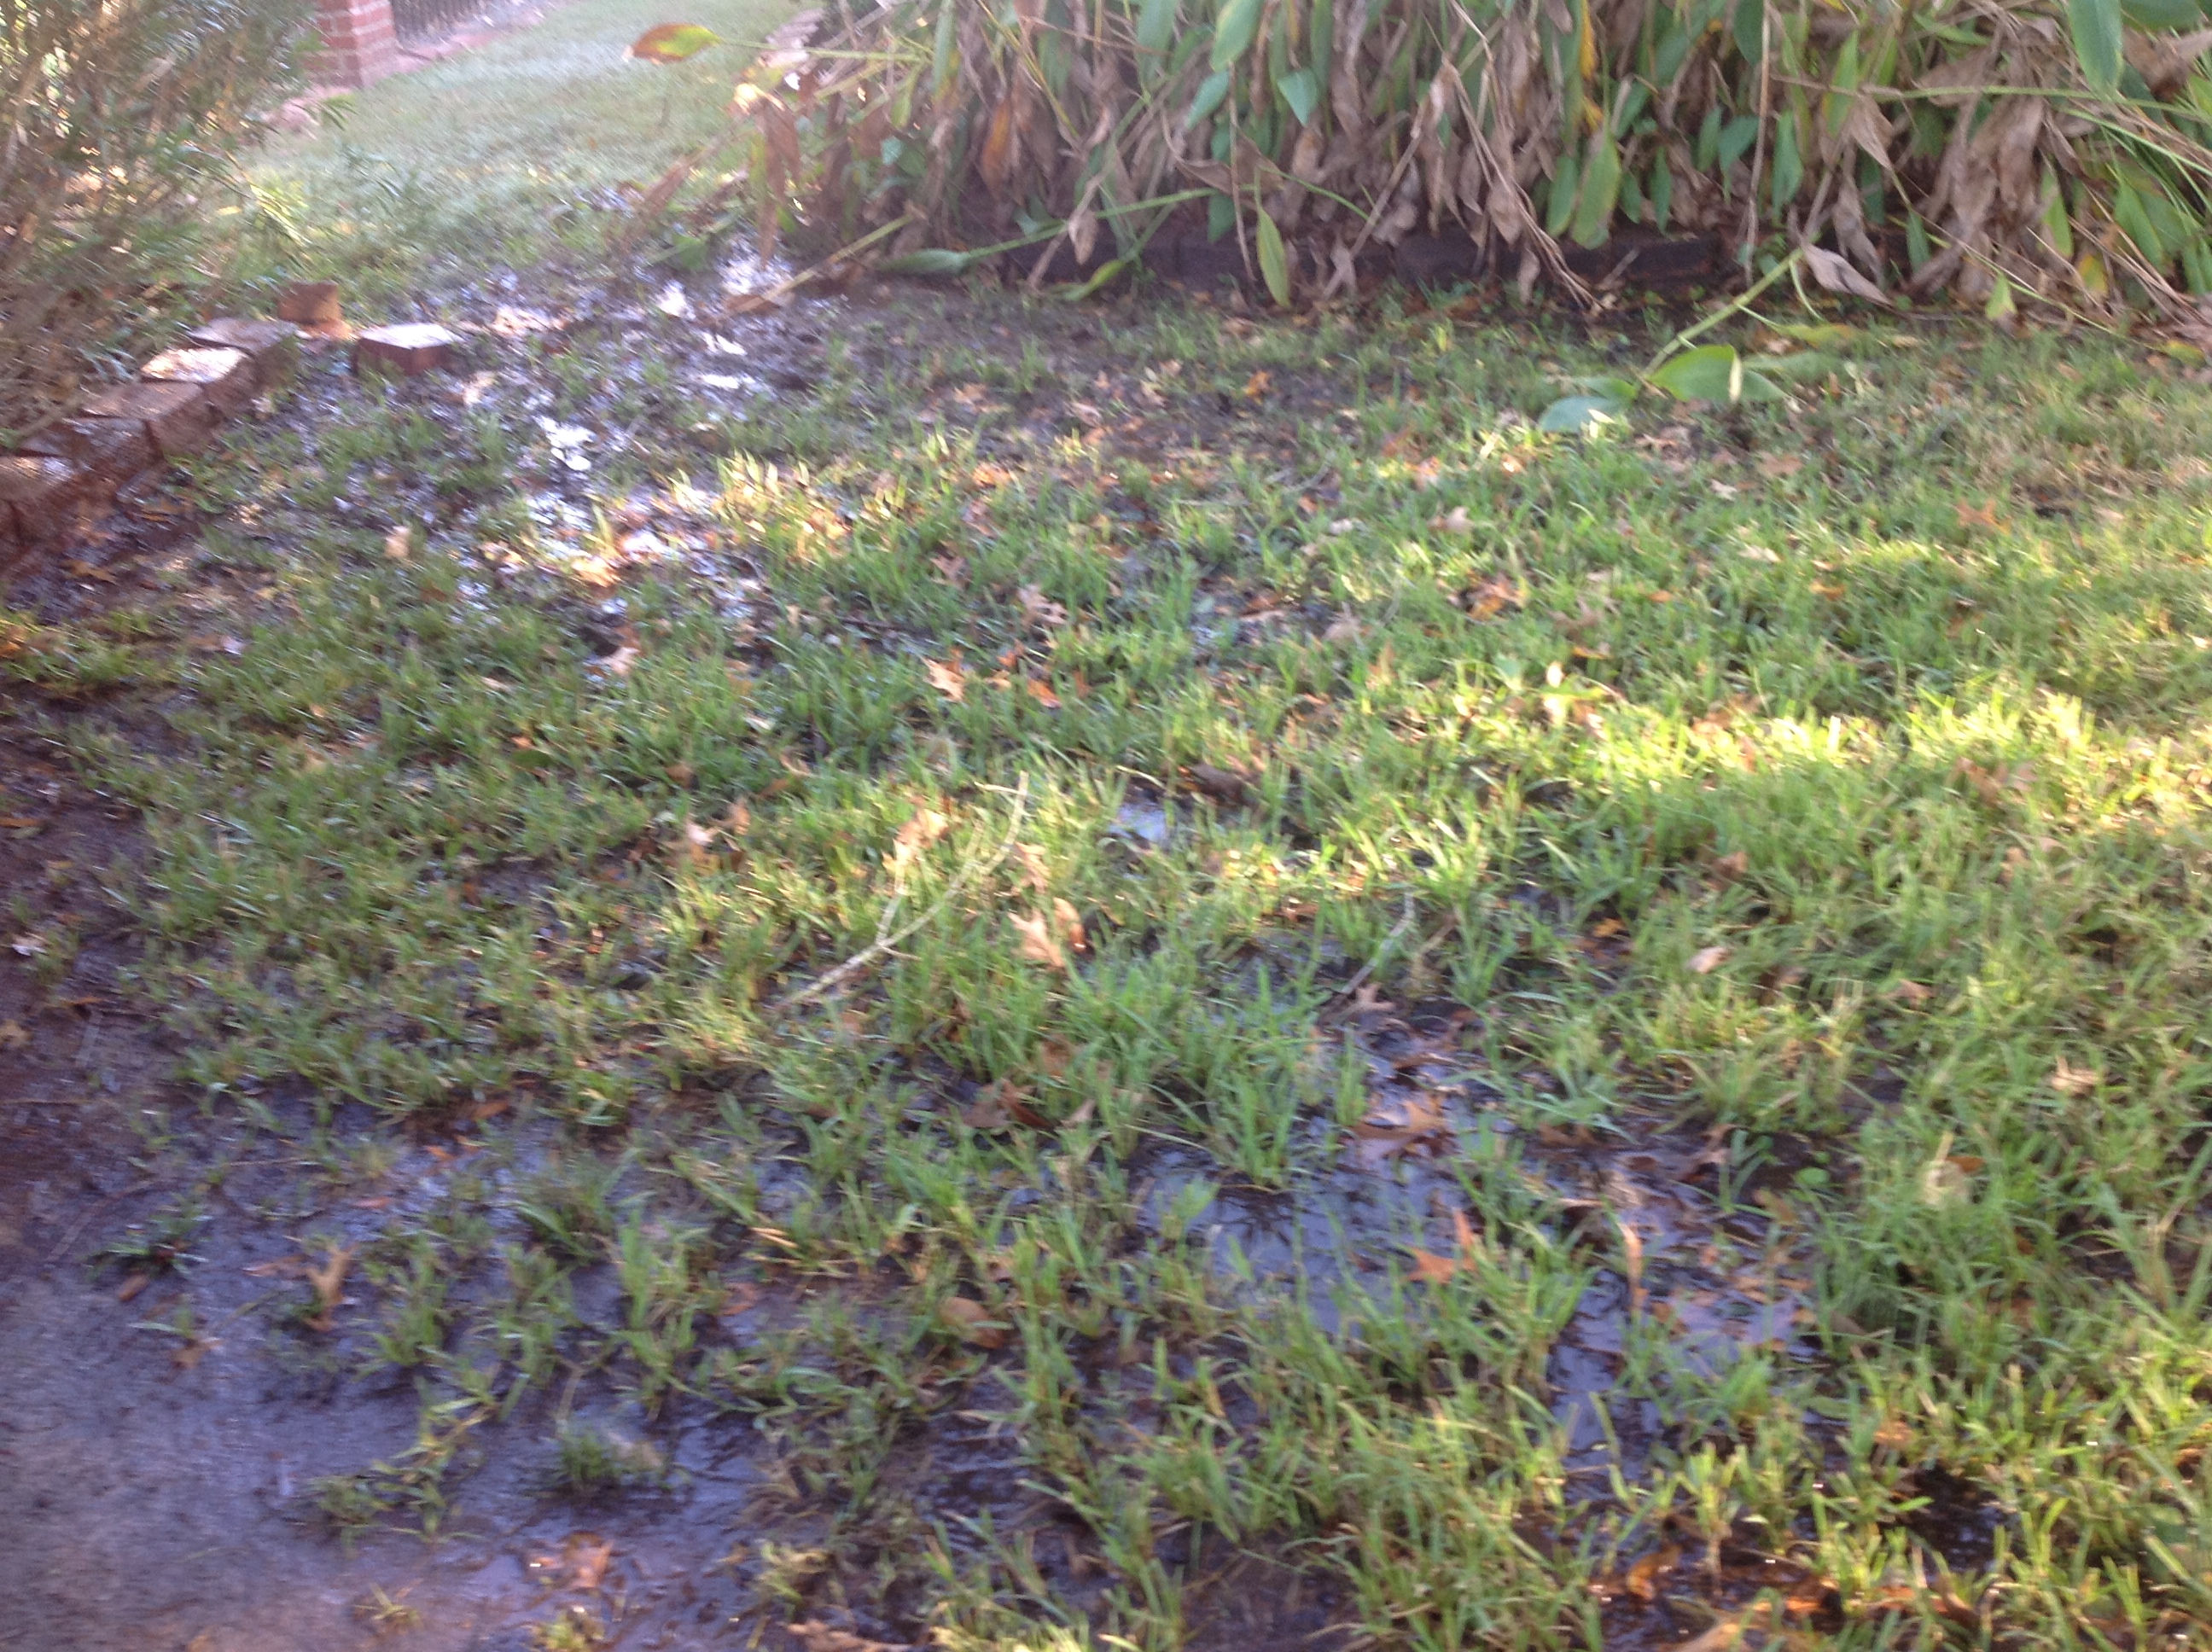 Lawn damaged due to drainage issues